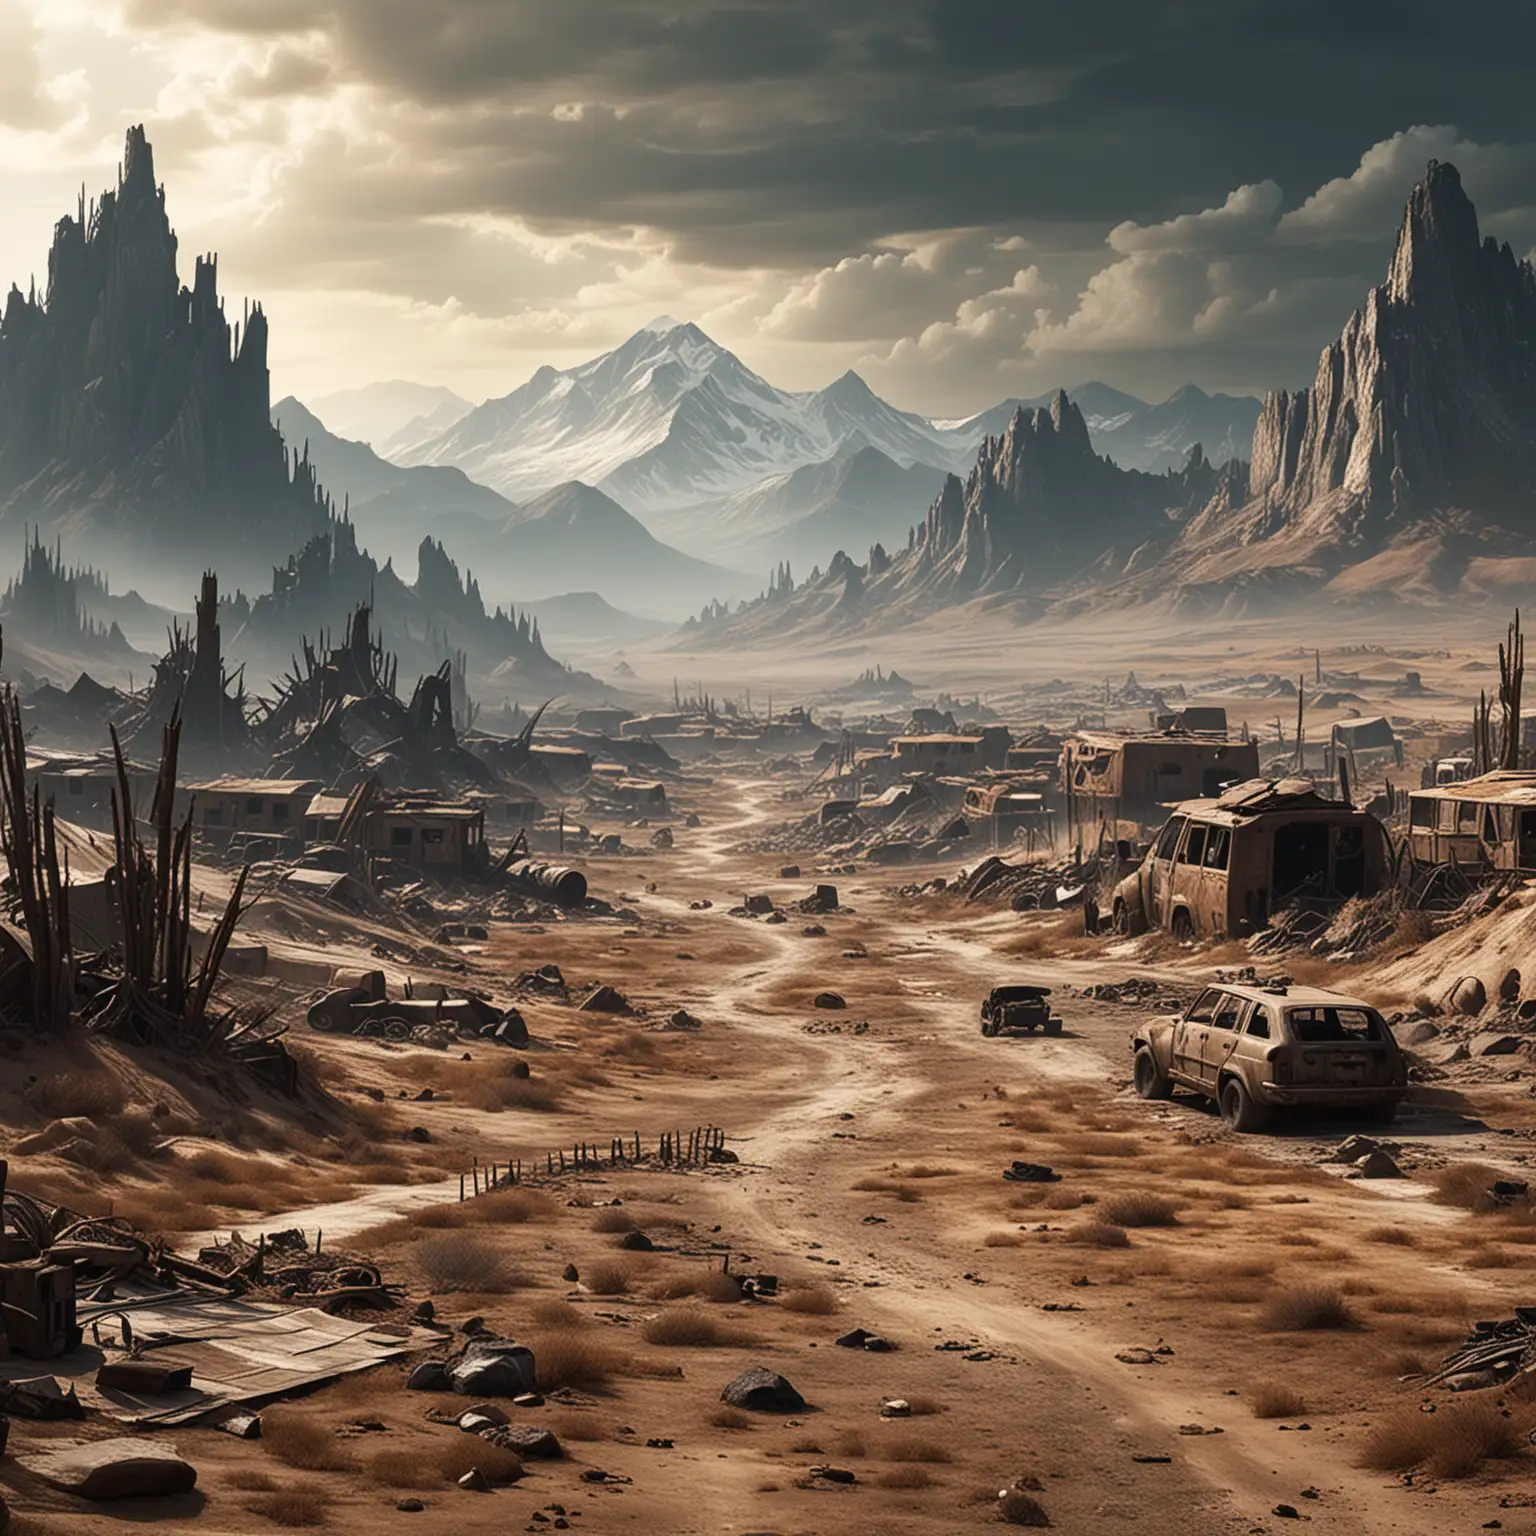 Desolate PostApocalyptic Landscape with Towering Mountains